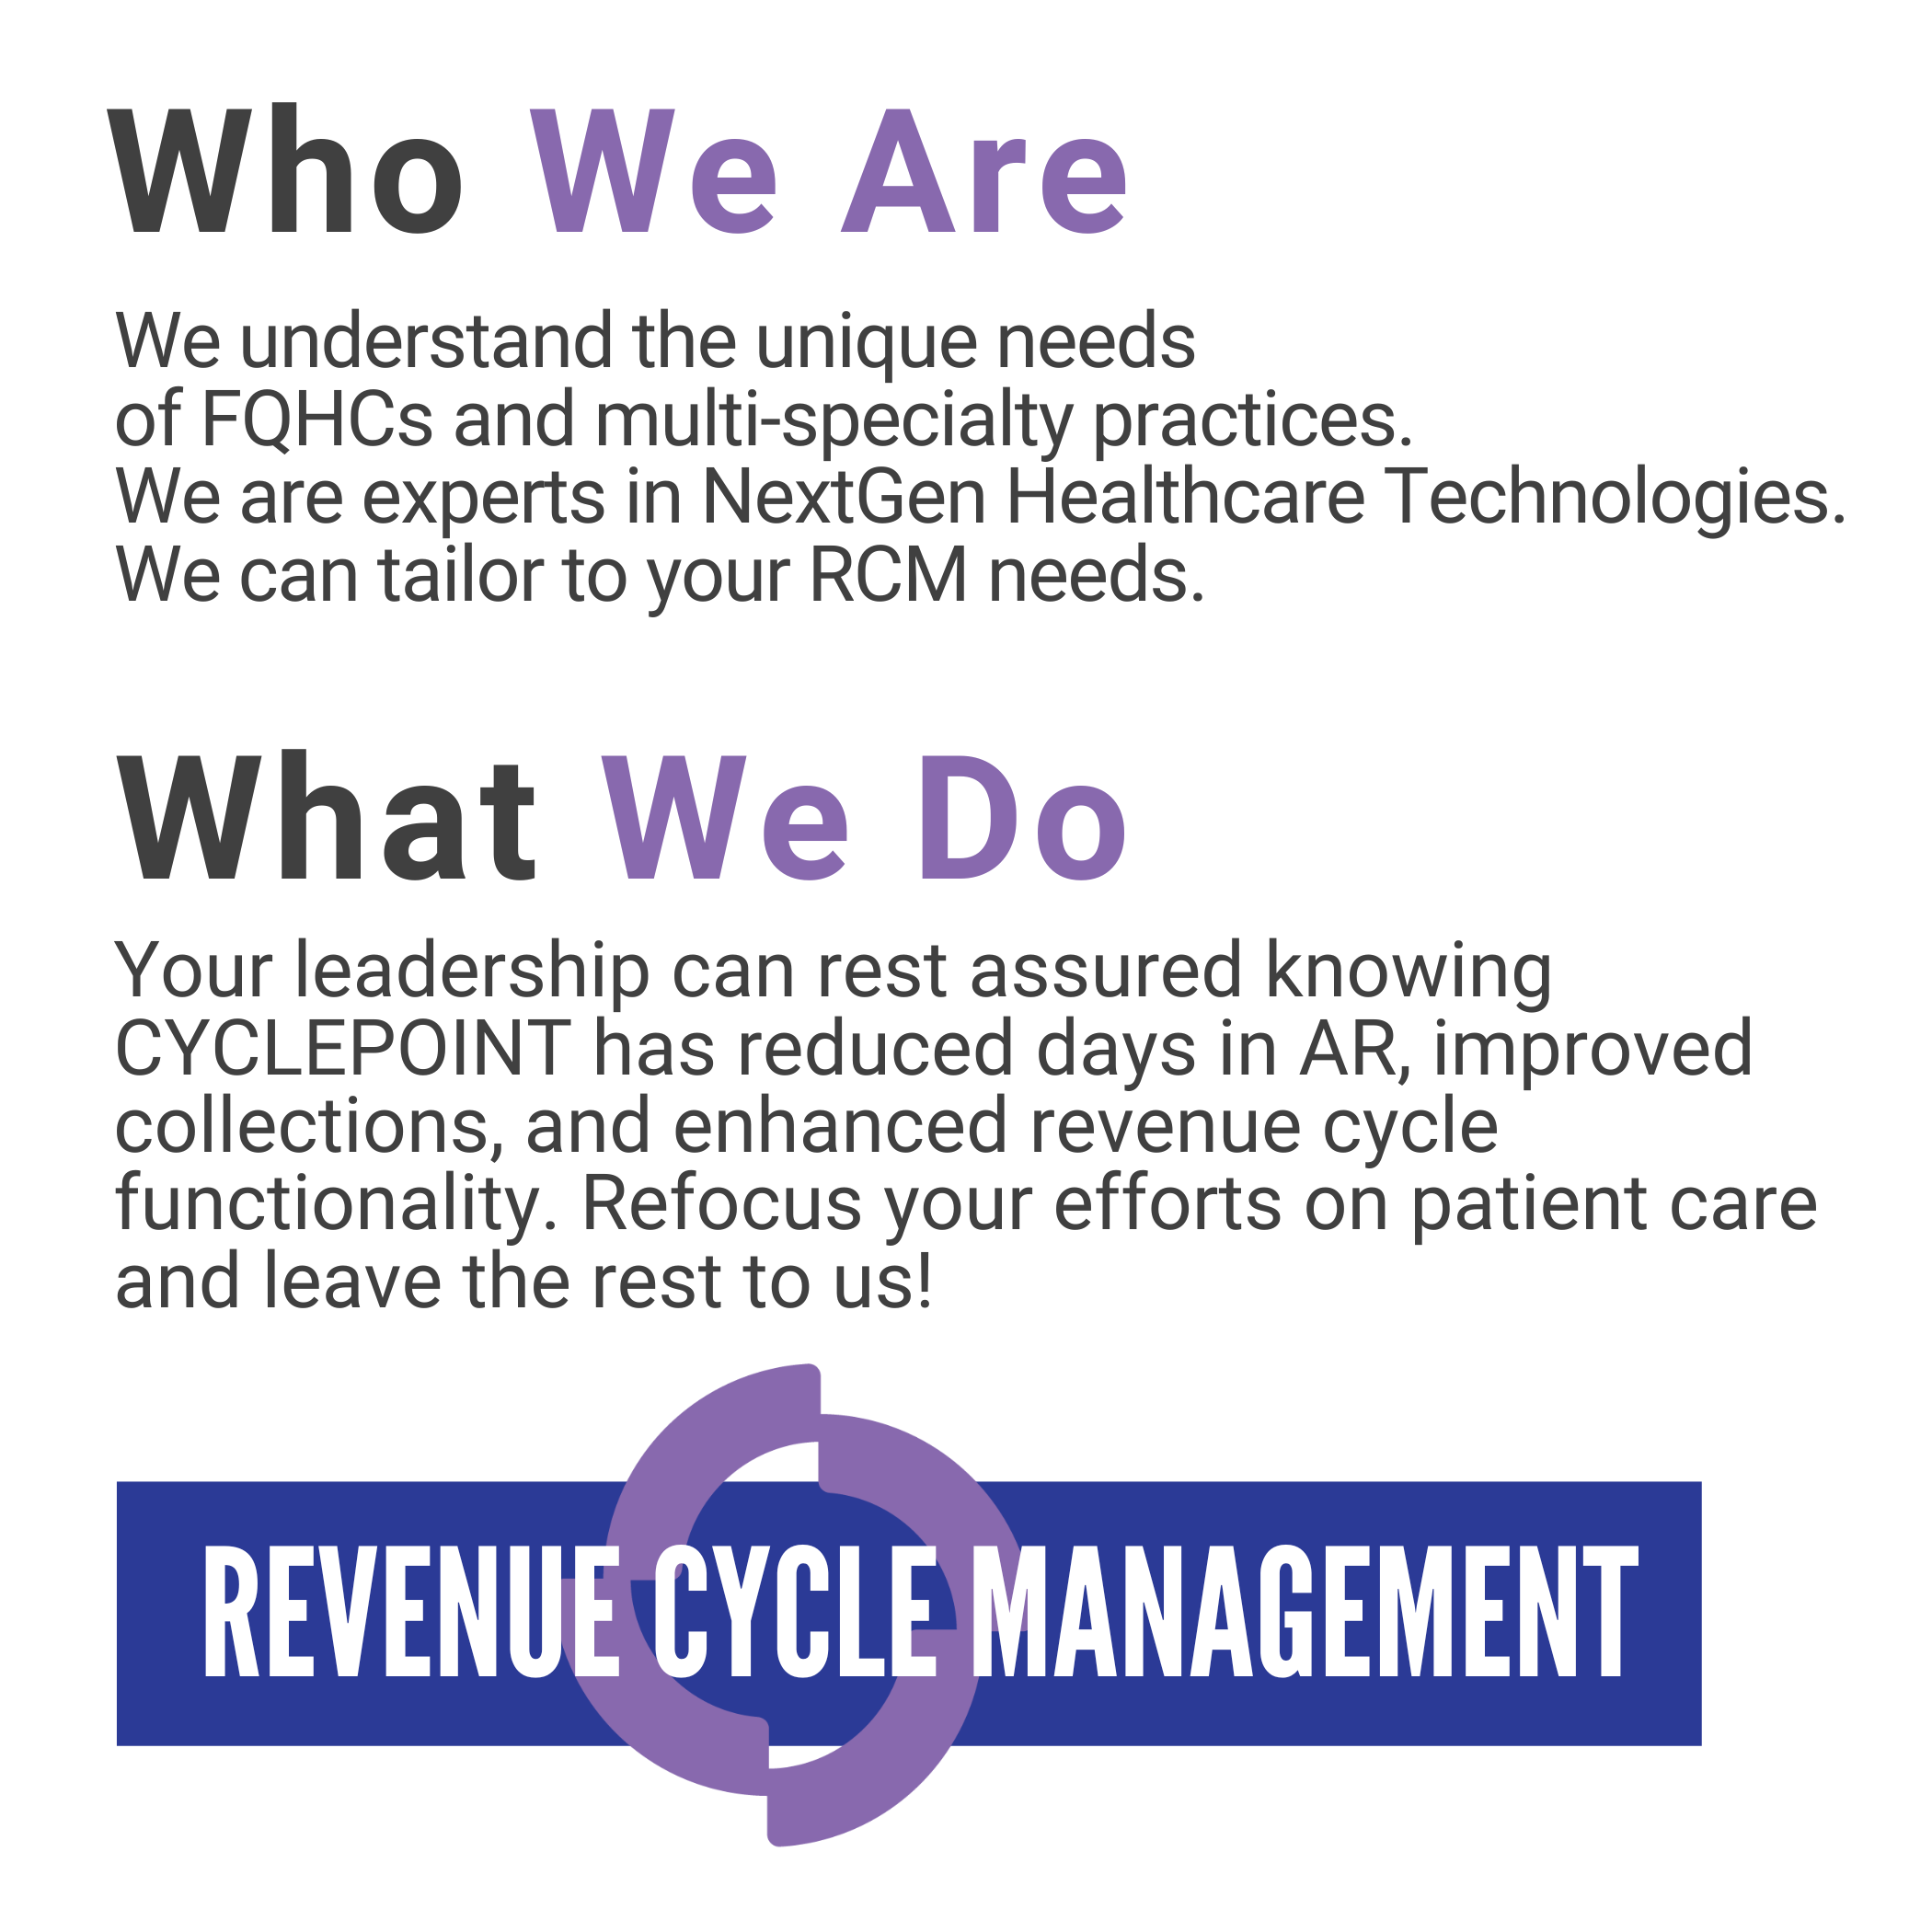 Cyclepoint-who-we-are-what-we-do-revenue-cycle-management (3)